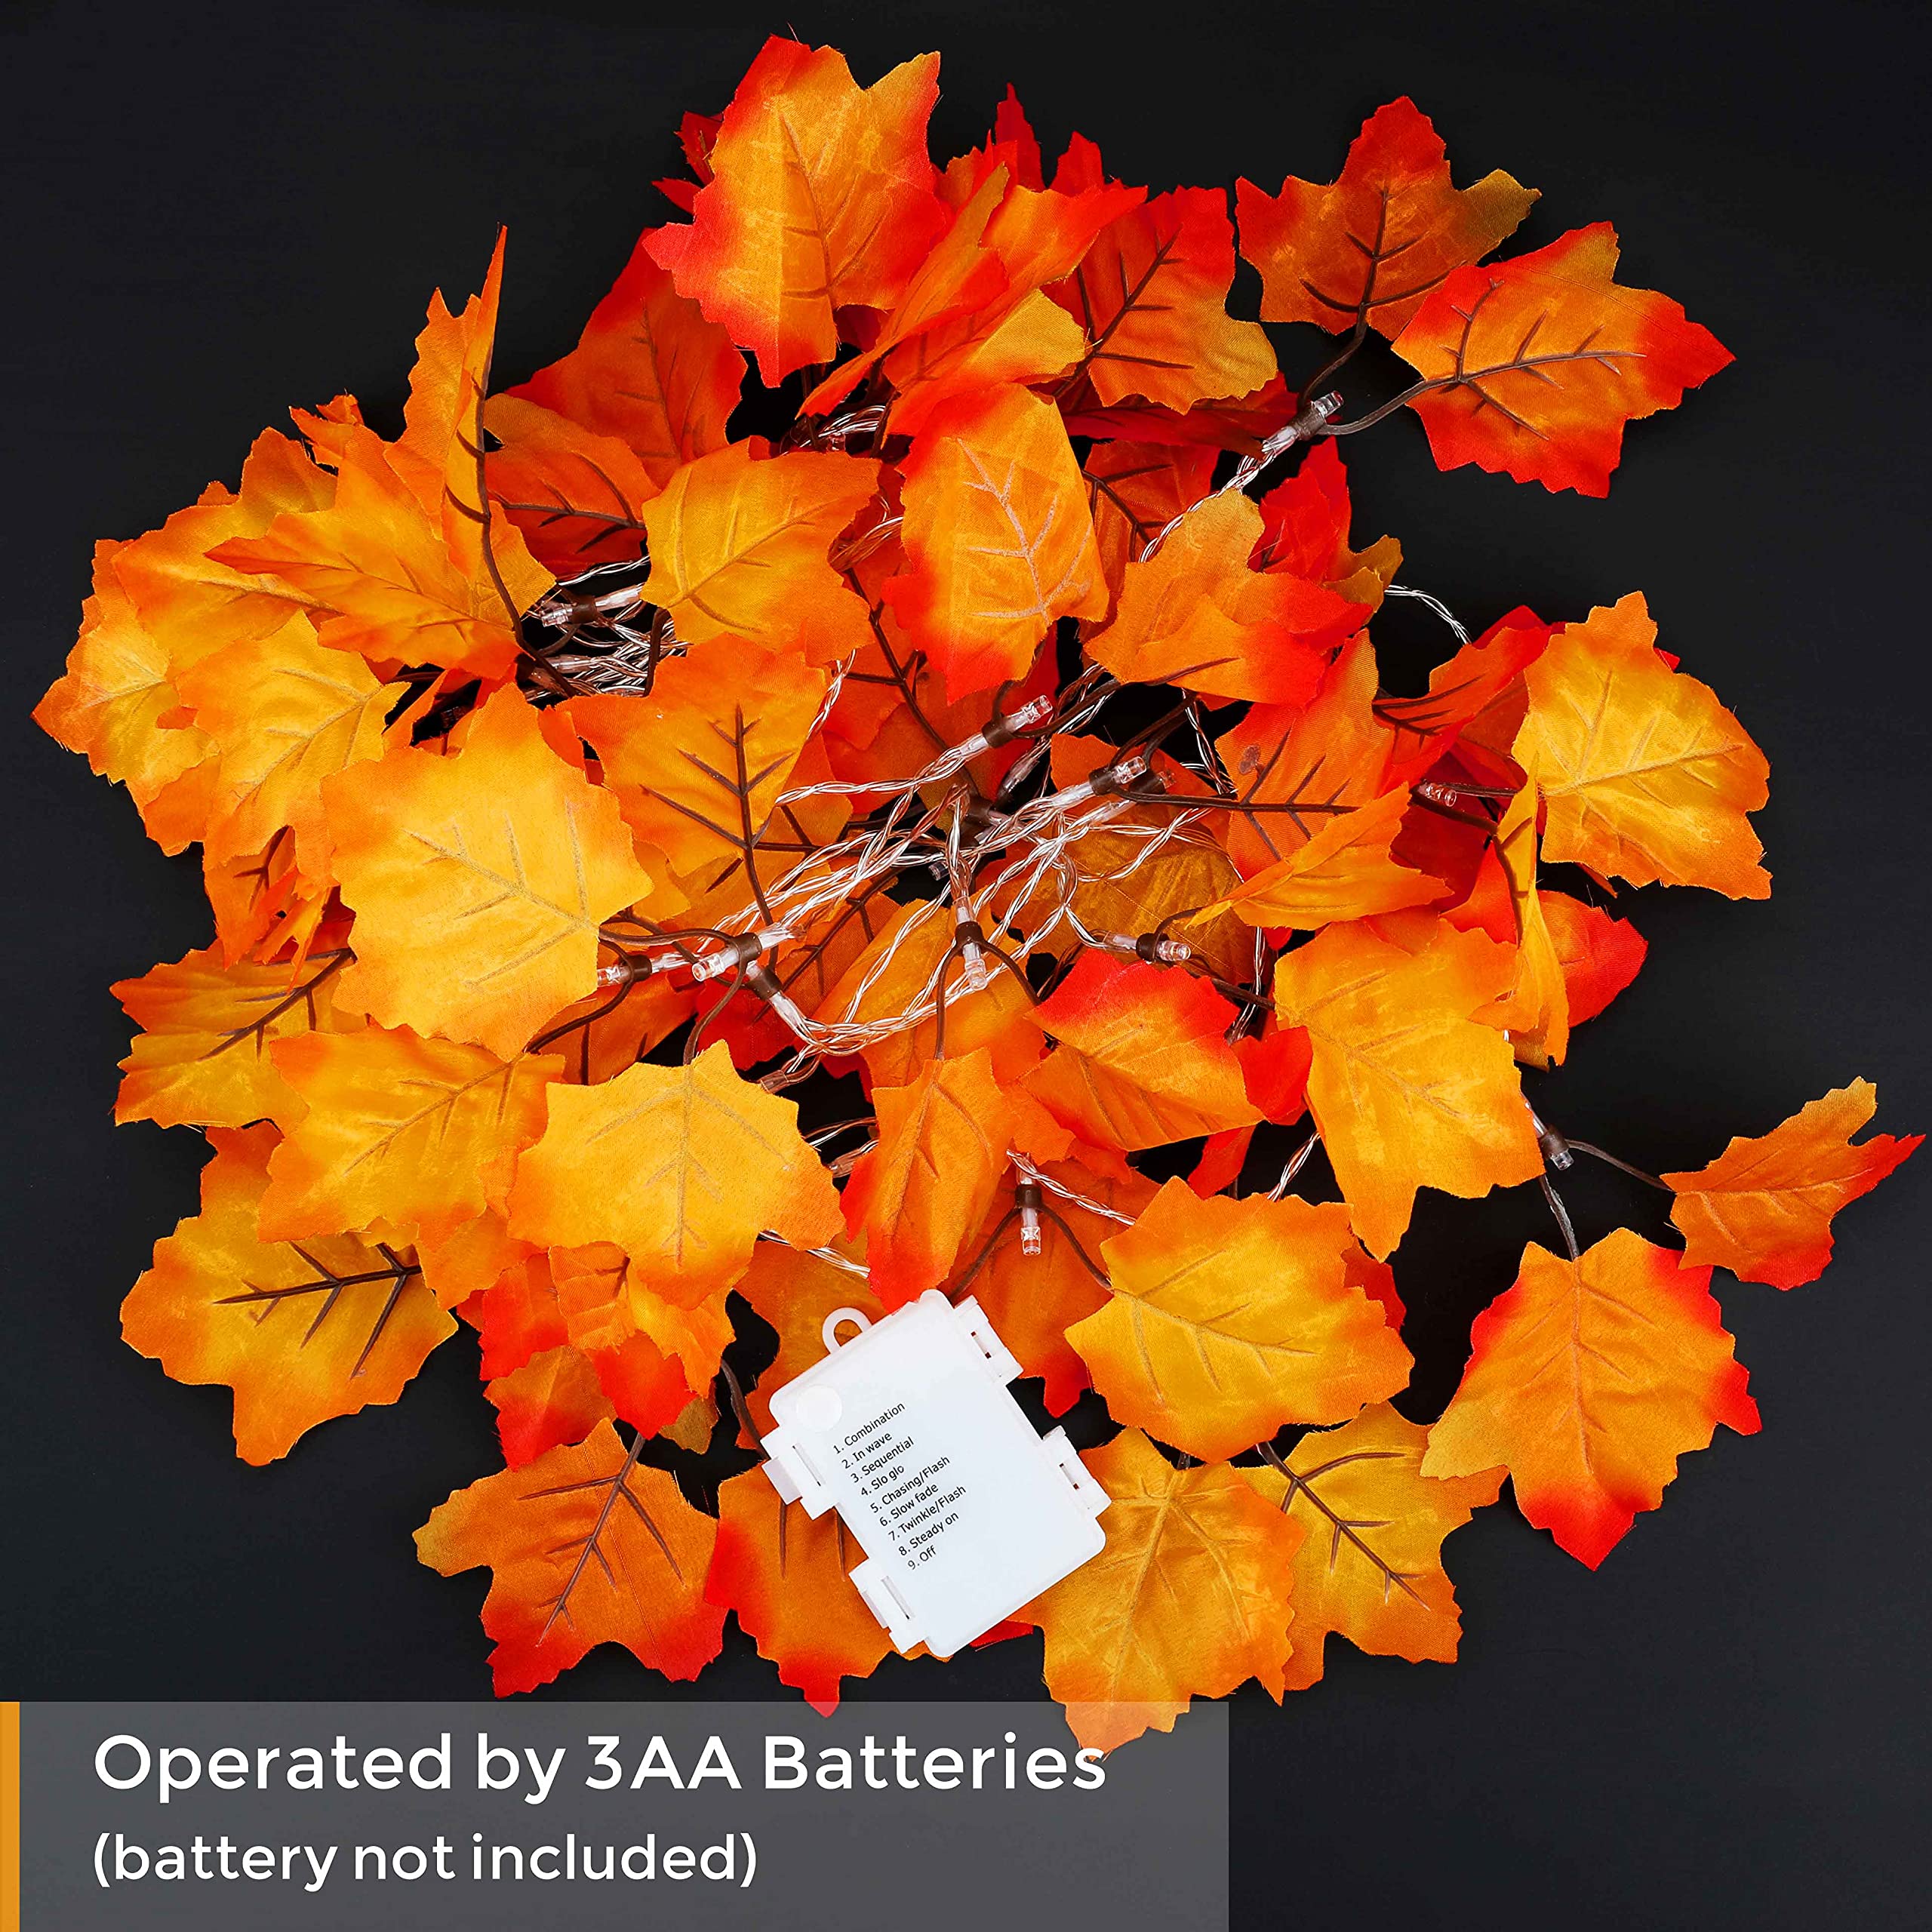 [8 Lighting Modes & Timer] Thanksgiving Decorations for Home Maple Leaf Garland with Lights 40LED Battery Operated Waterproof String Lights, Fall Decor Indoor Halloween Friendsgiving Autumn